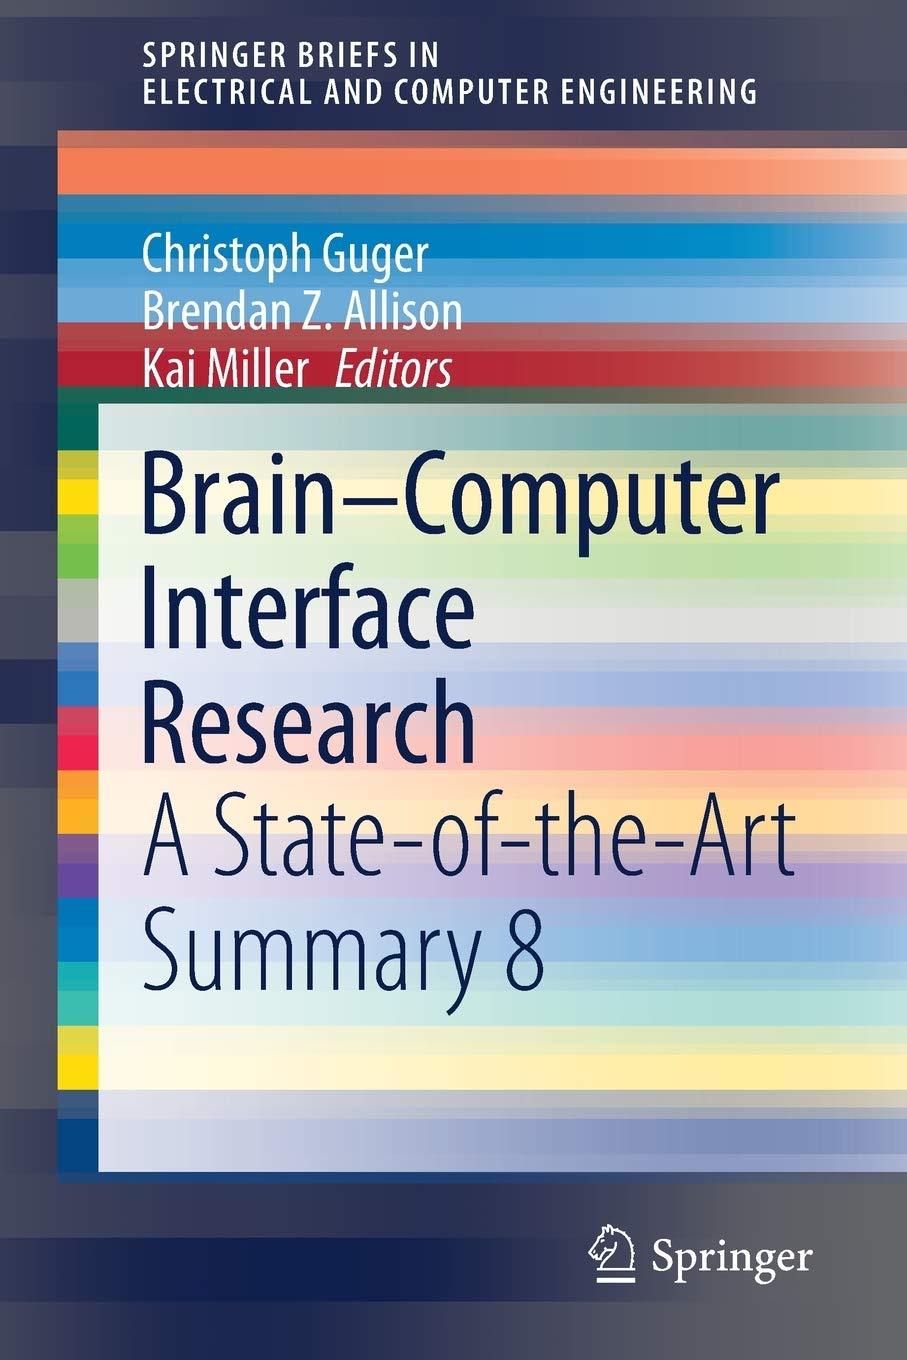 brain computer interface research a state of the art summary 8 1st edition christoph guger, brendan z.